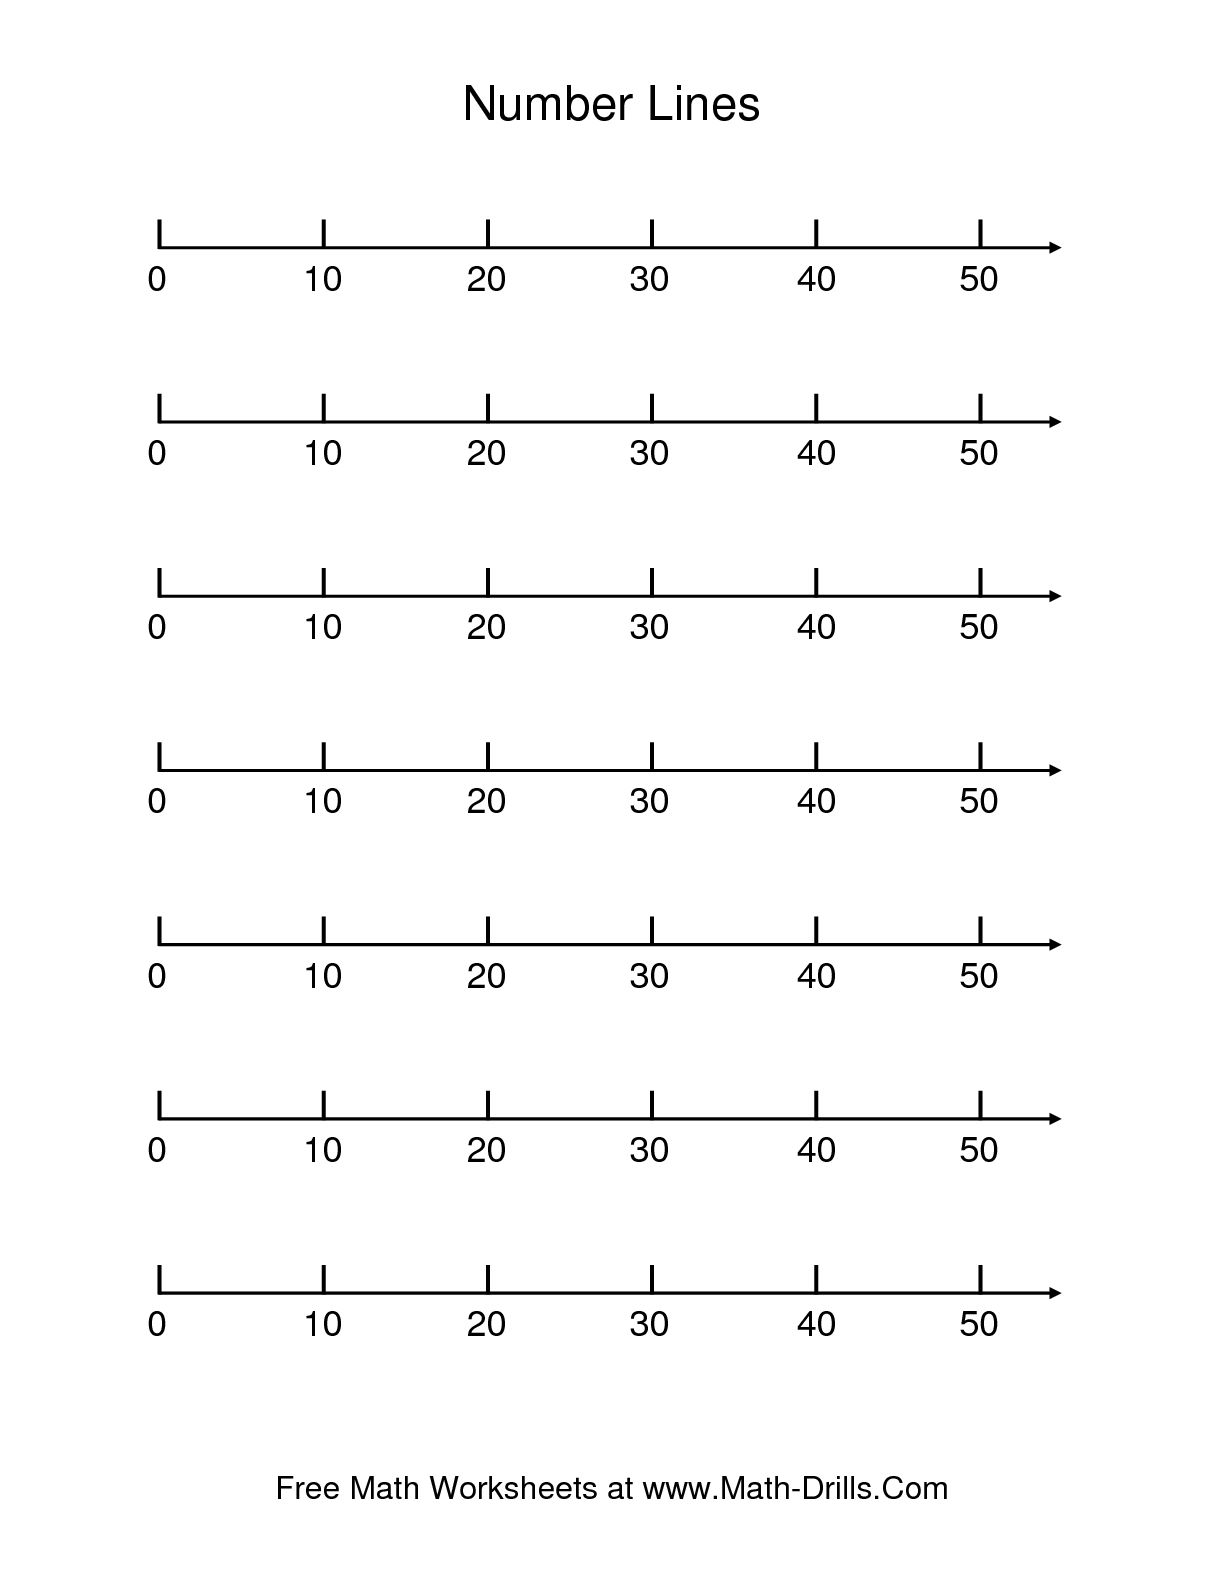 Number Line Counting by 10 Image